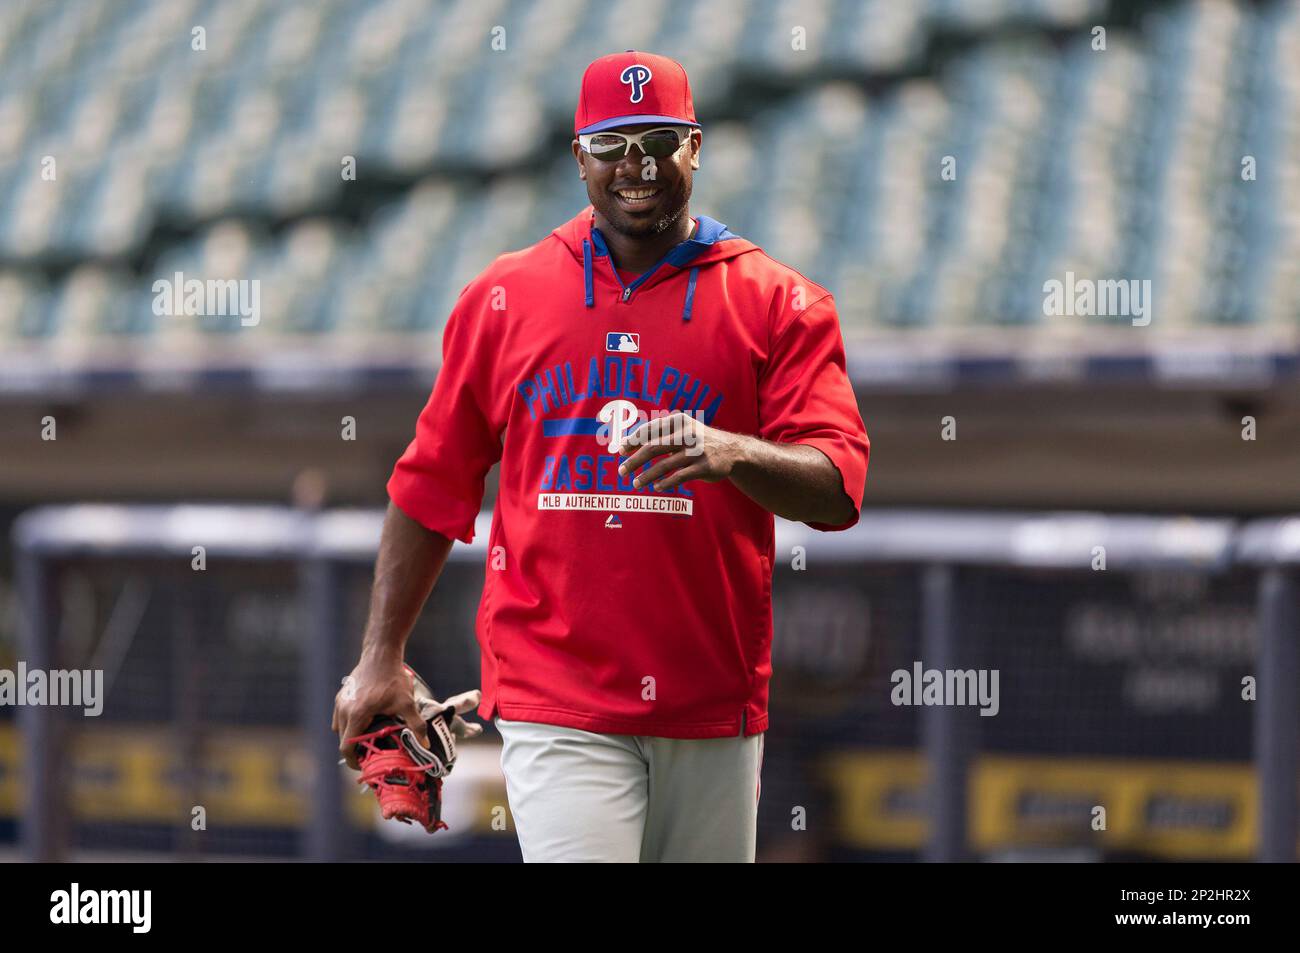 August 15, 2015: Philadelphia Phillies first baseman Ryan Howard #6 before  the Major League Baseball game between the Milwaukee Brewers and the  Philadelphia Phillies at Miller Park in Milwaukee, WI. John Fisher/CSM (